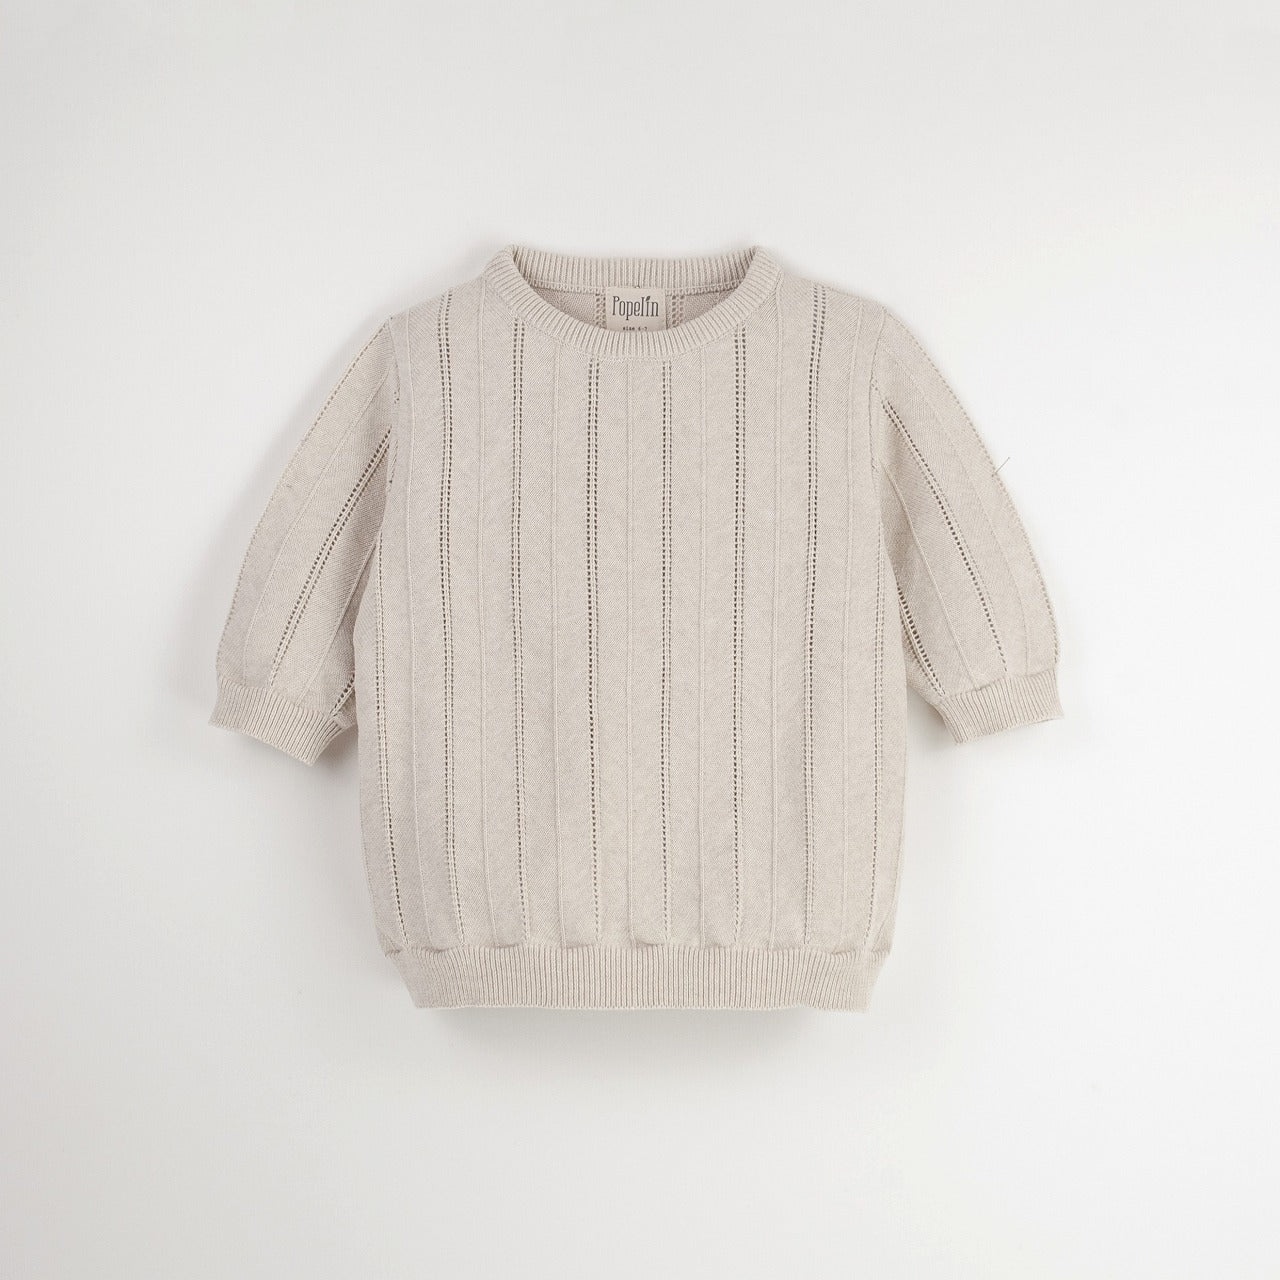 【Popelin】【30%OFF】Beige openwork knit jersey ニットジャージー 12/18m,18/24m  | Coucoubebe/ククベベ